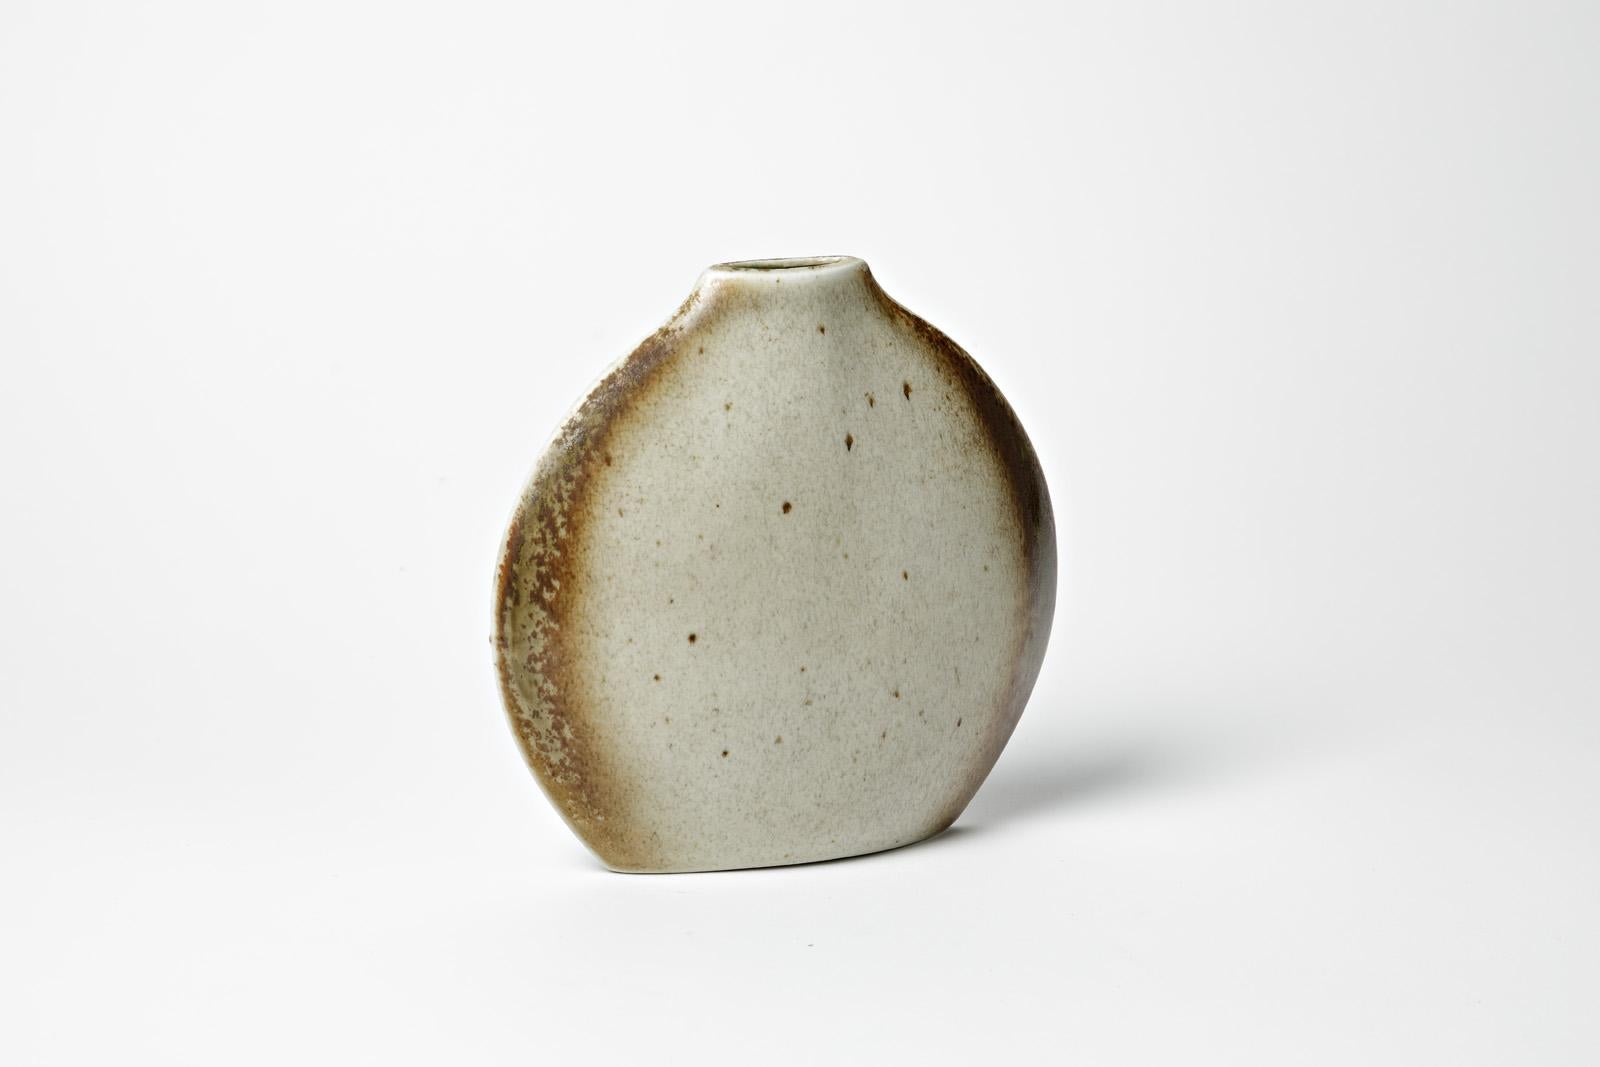 French White and Brown Circular Ceramic Vase by Montreau for Virebent 1970 Design For Sale